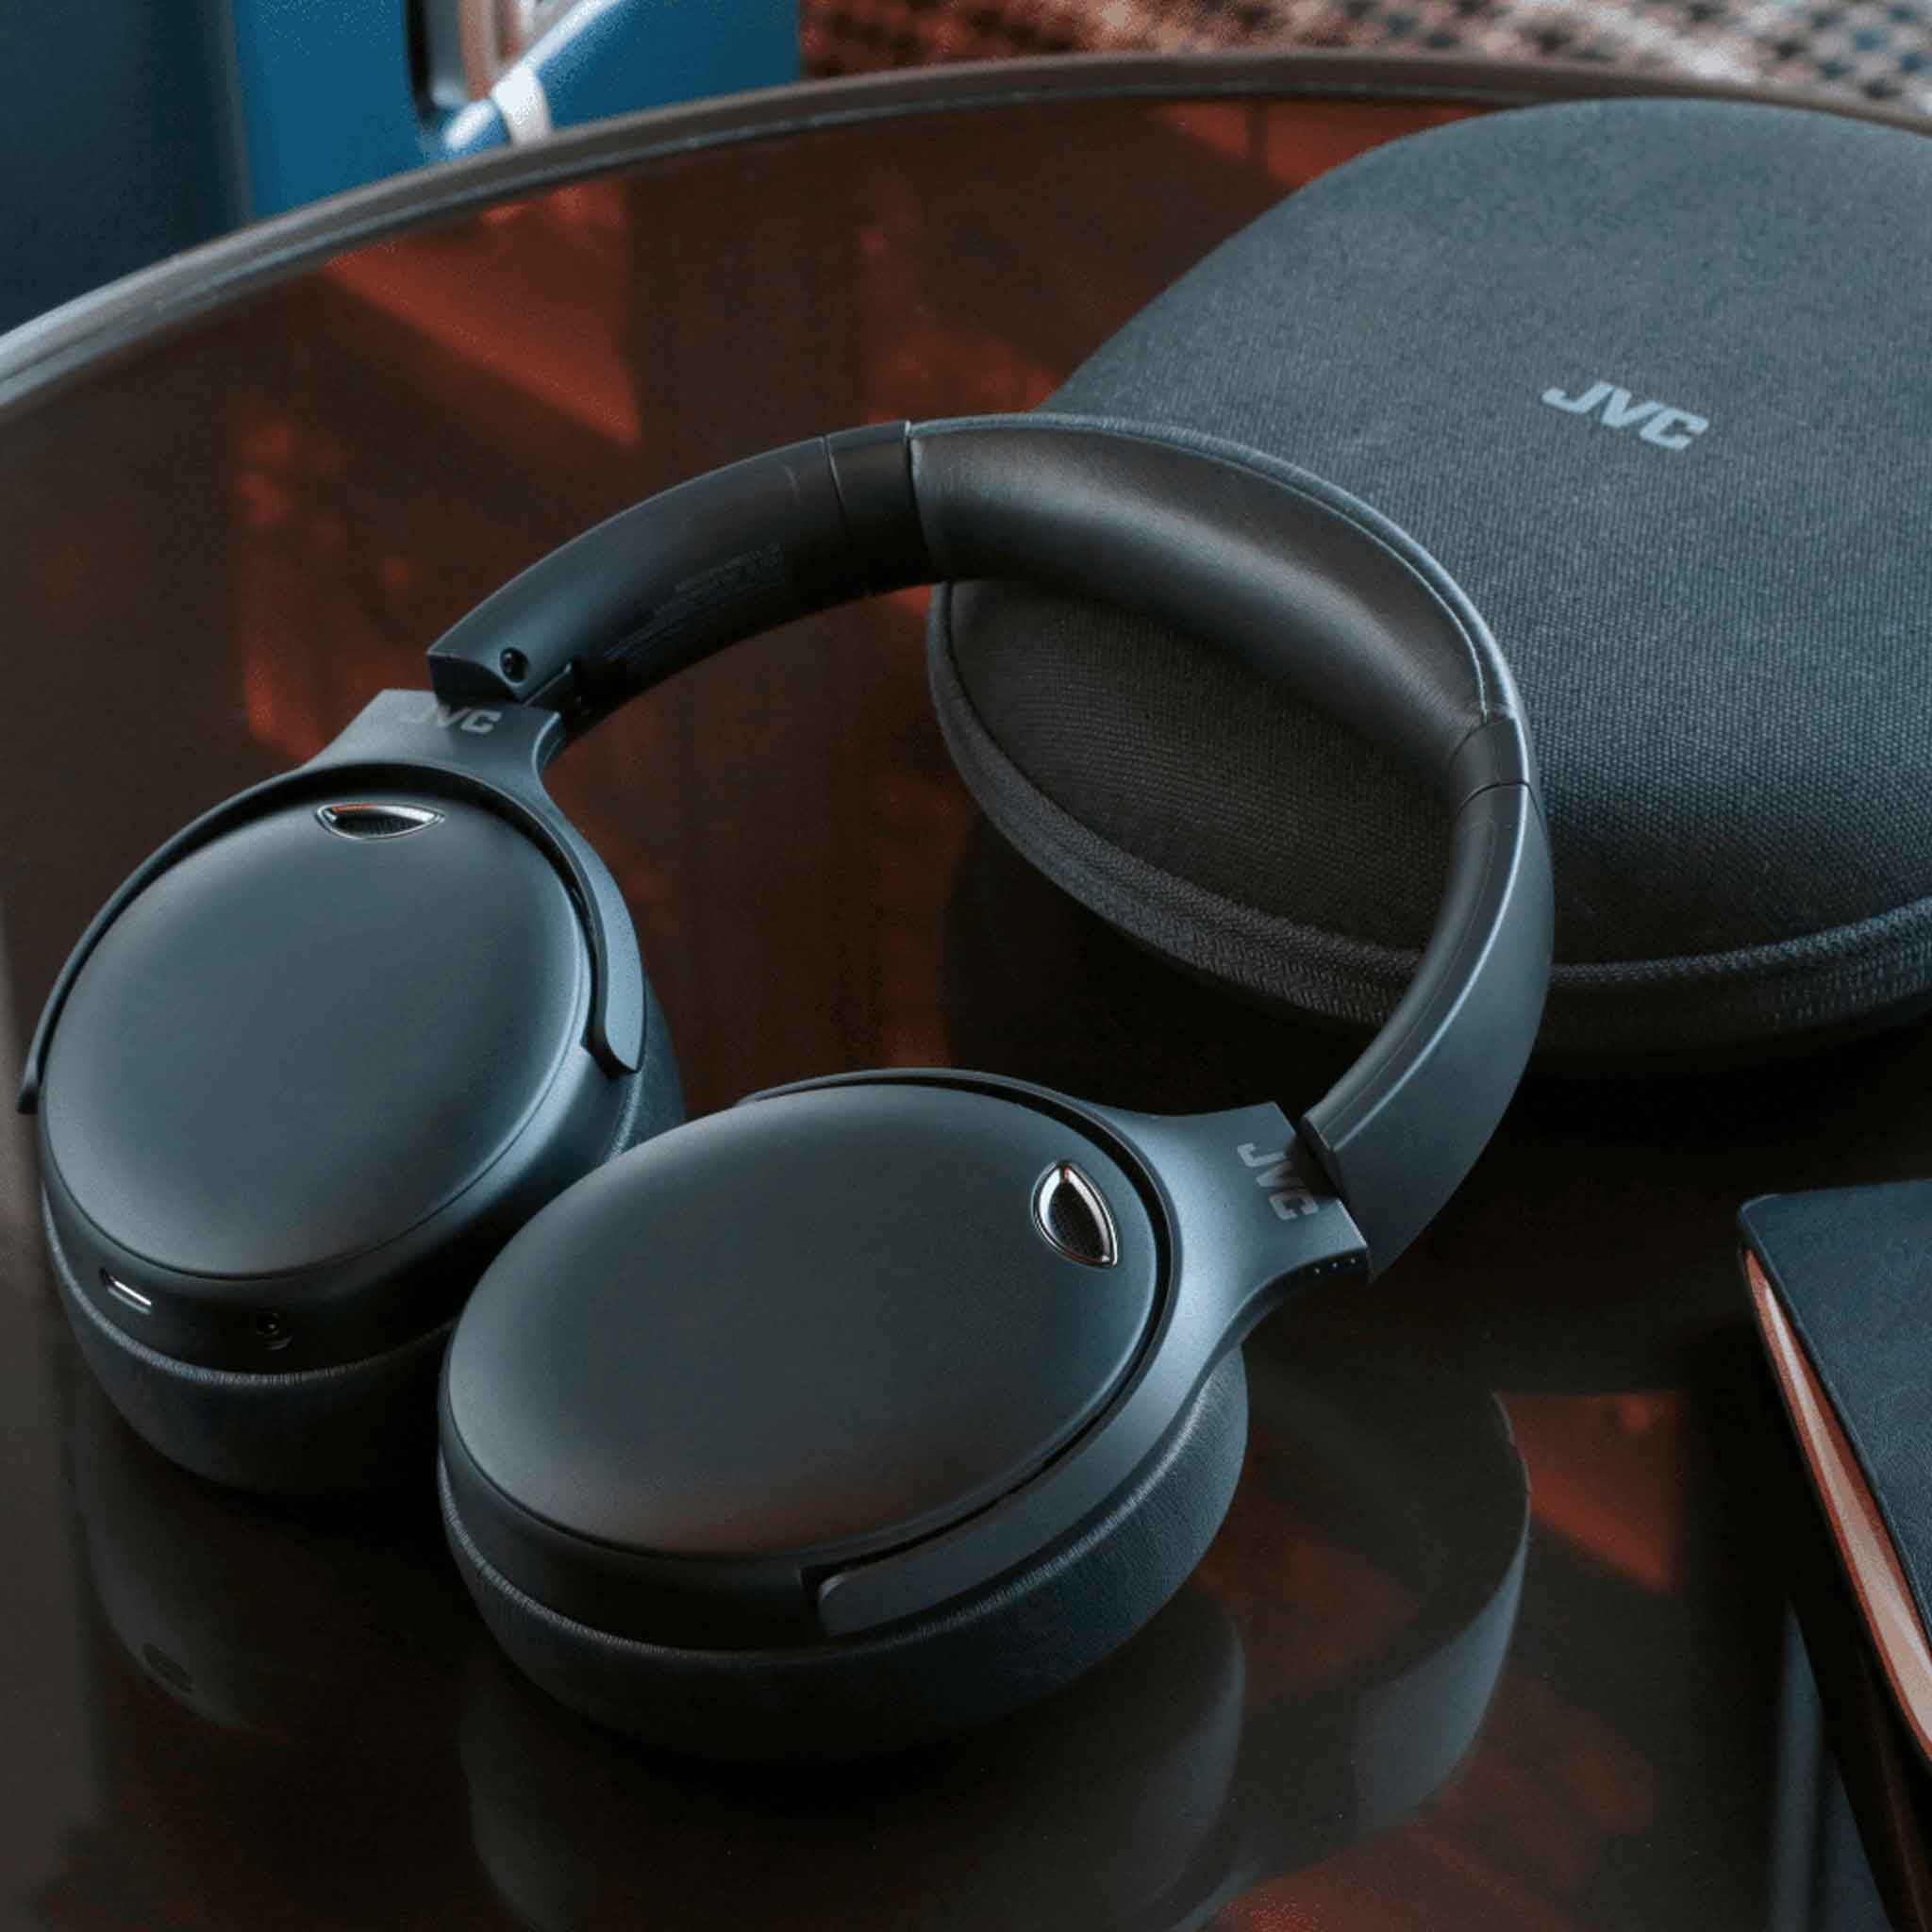 HA-S100N active noise cancelling around-ear headphones by JVC